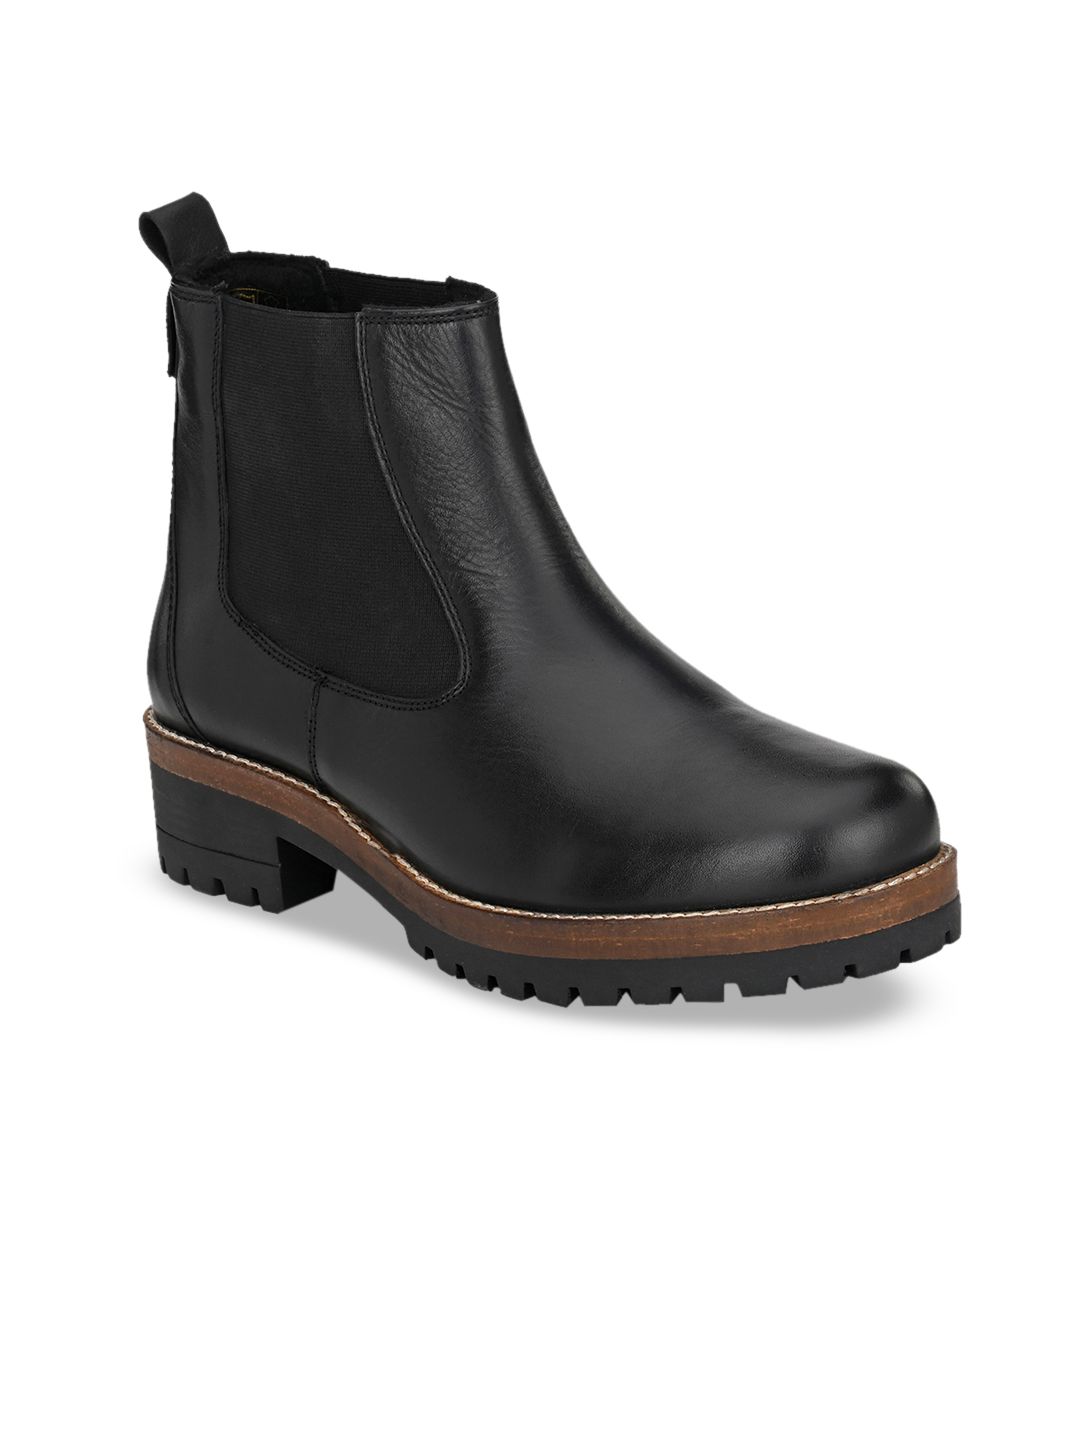 Delize Women Black Solid Leather Mid-Top Flat Boots Price in India